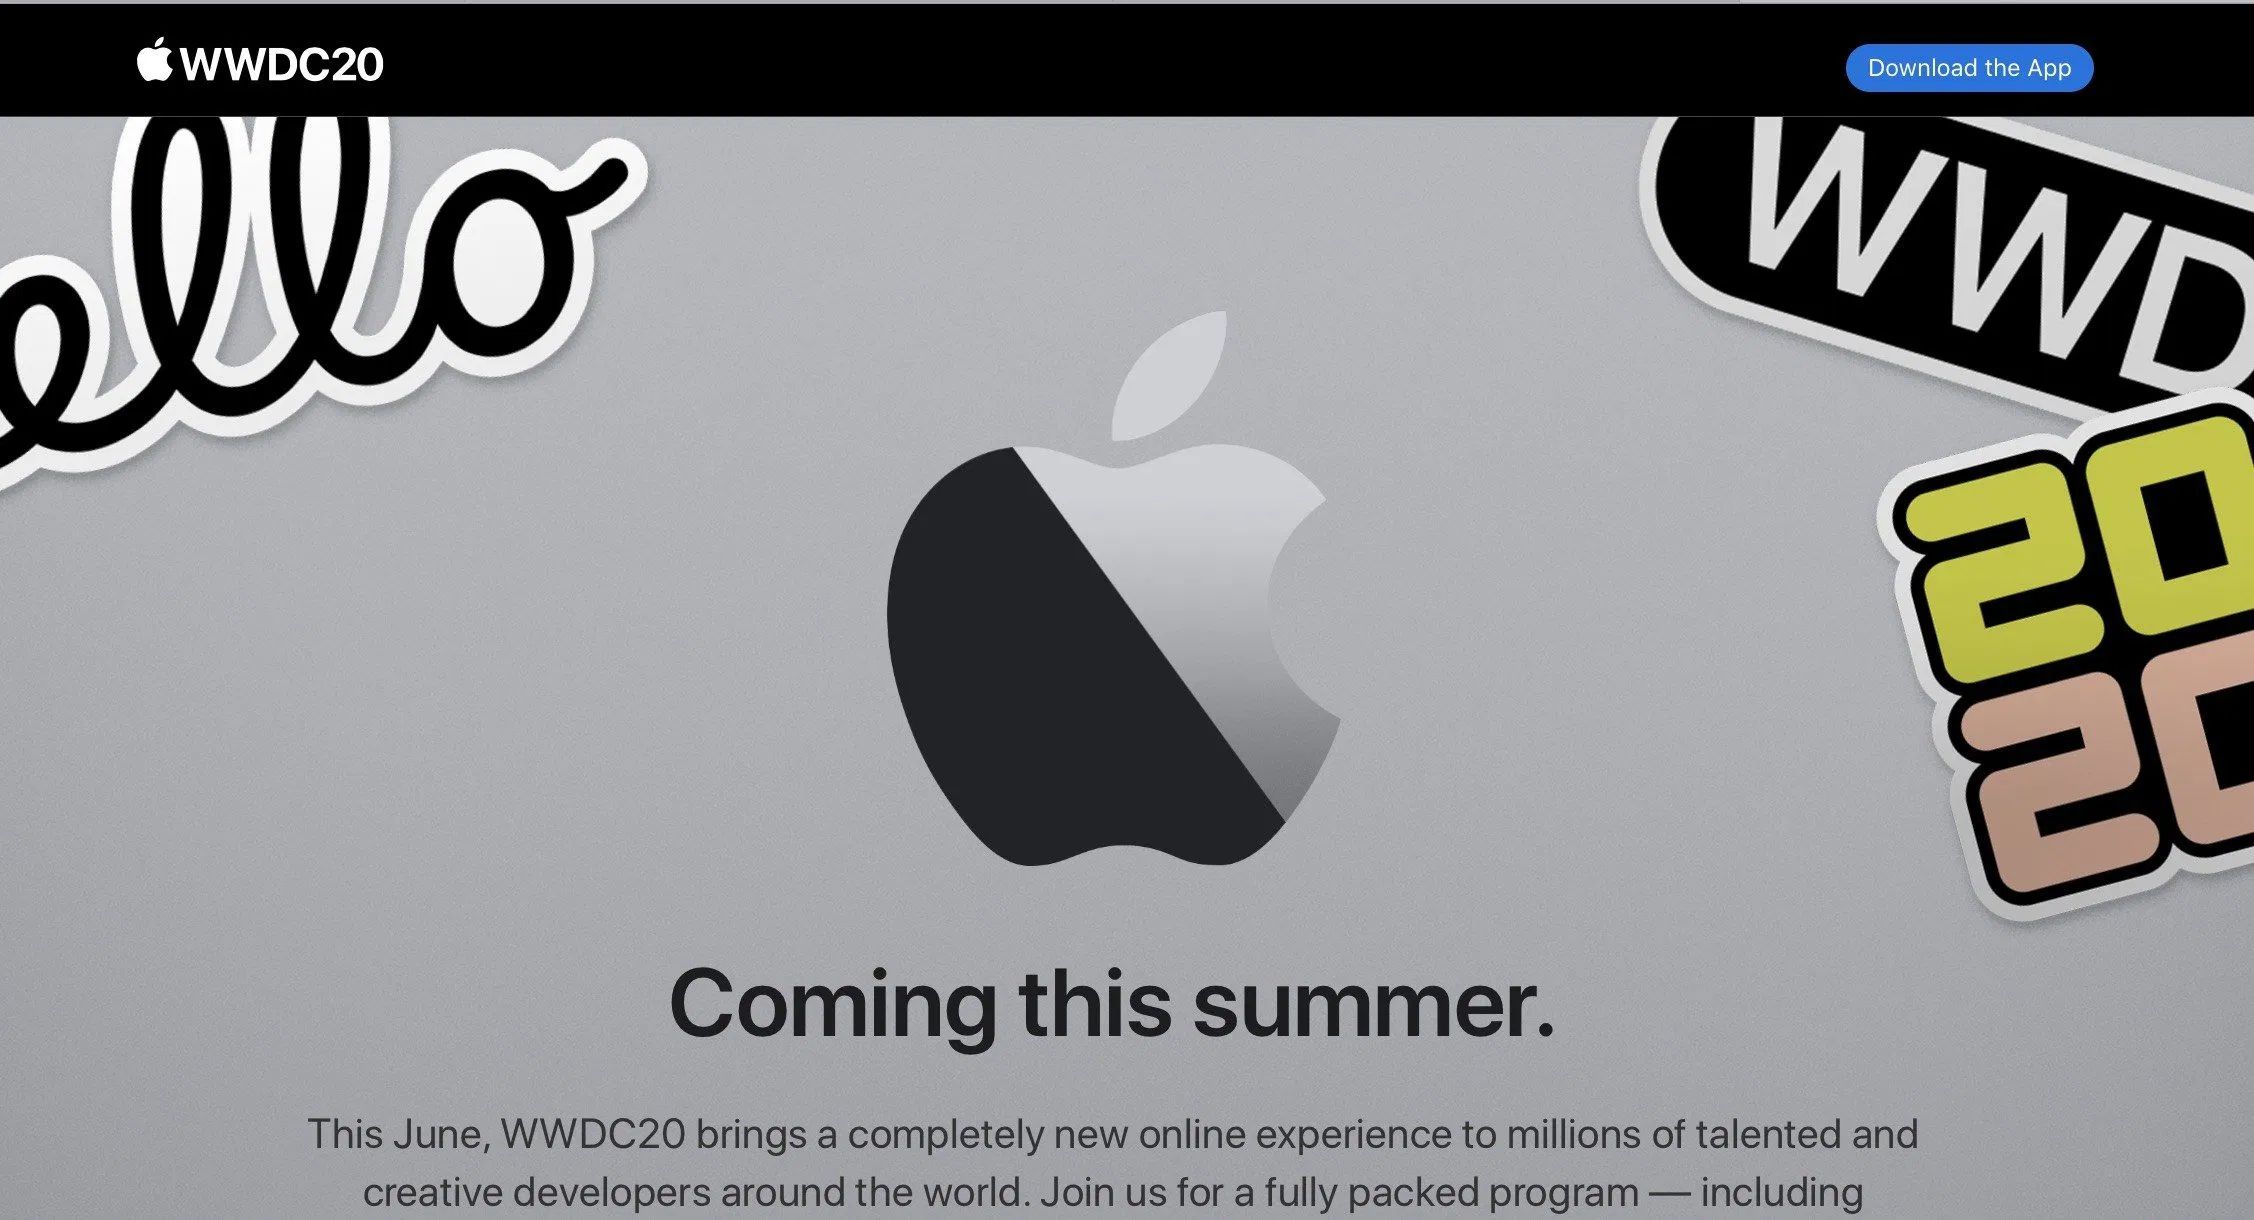 Apple Announces WWDC 2020 Coming in June as an ‘Online Experience’